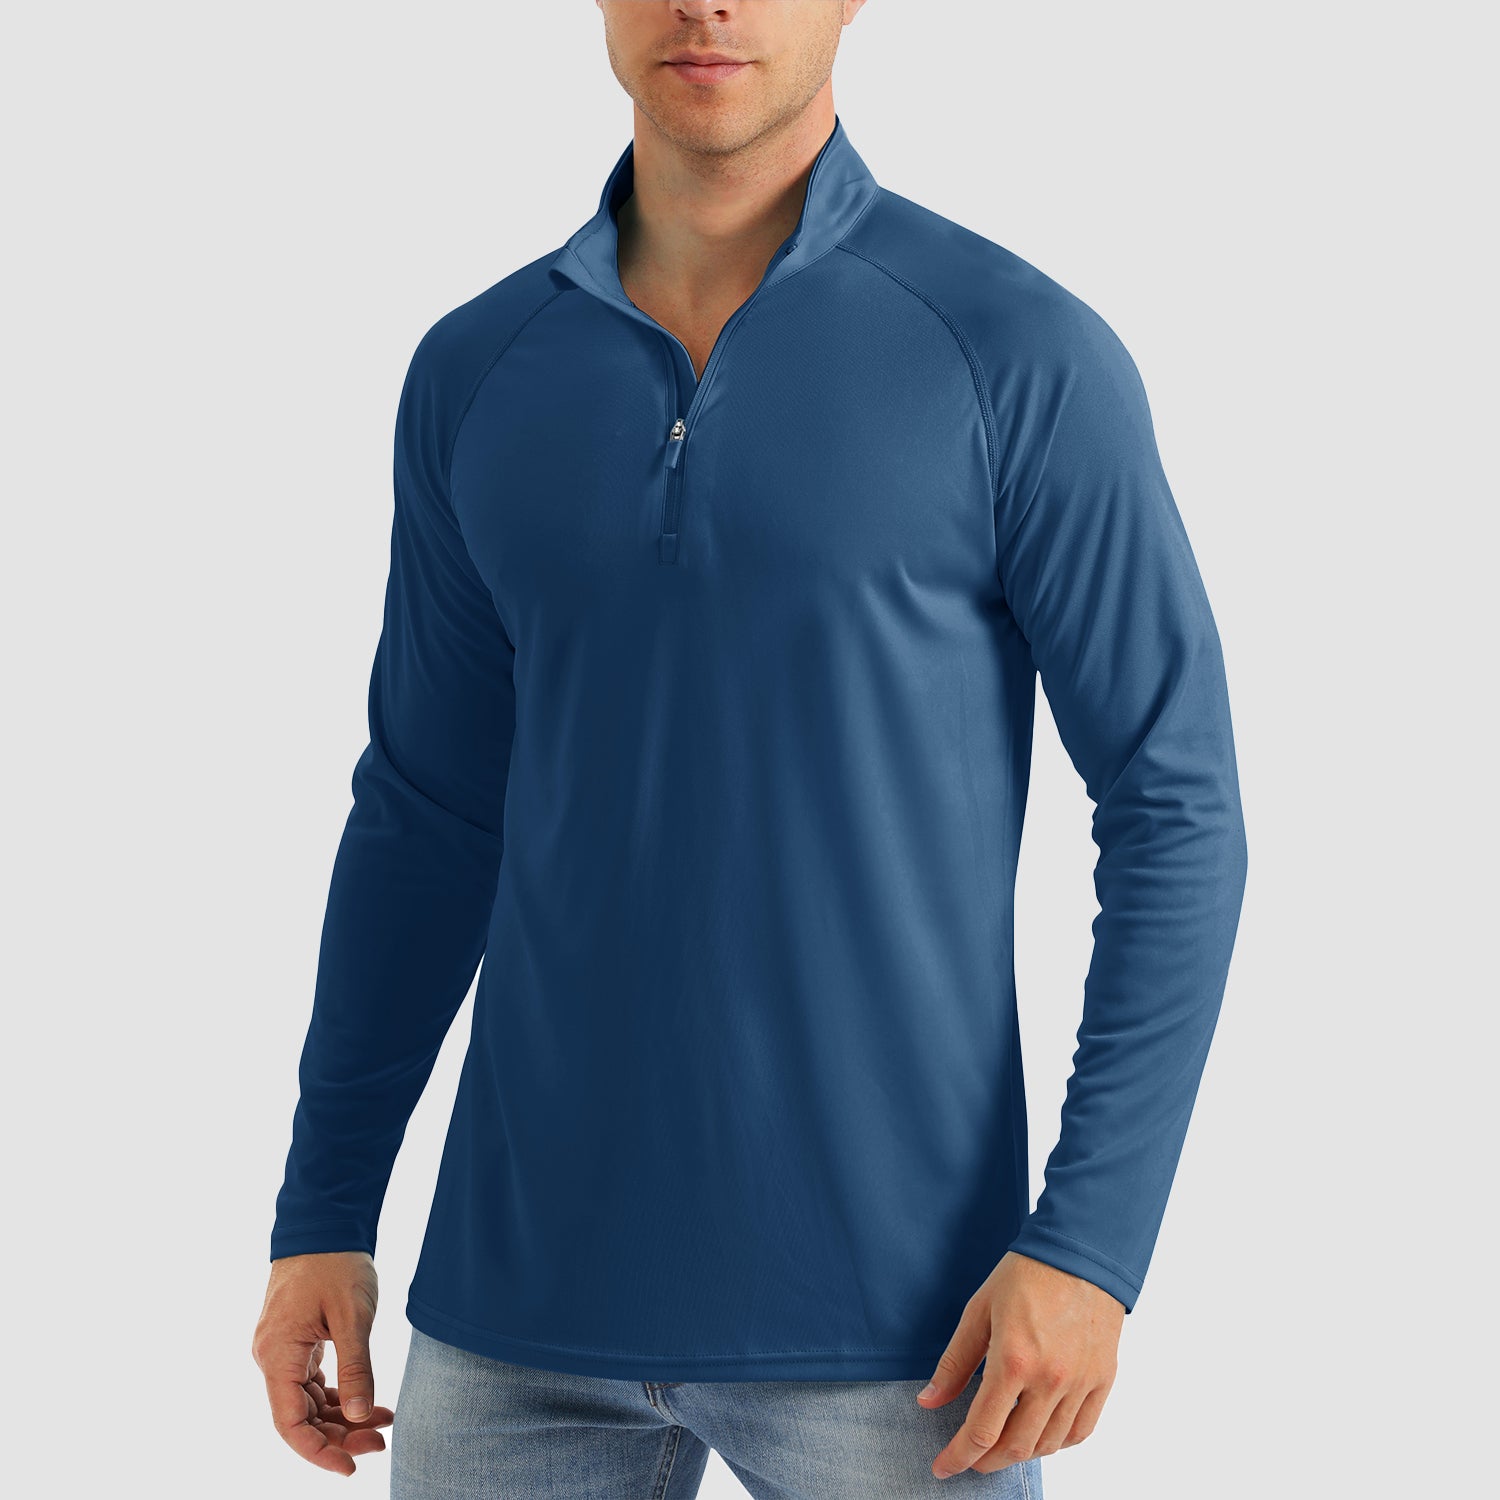 Men's Long Sleeve Shirt UPF 50 Quick Dry for Outdoor Sports, Blue Grey / S